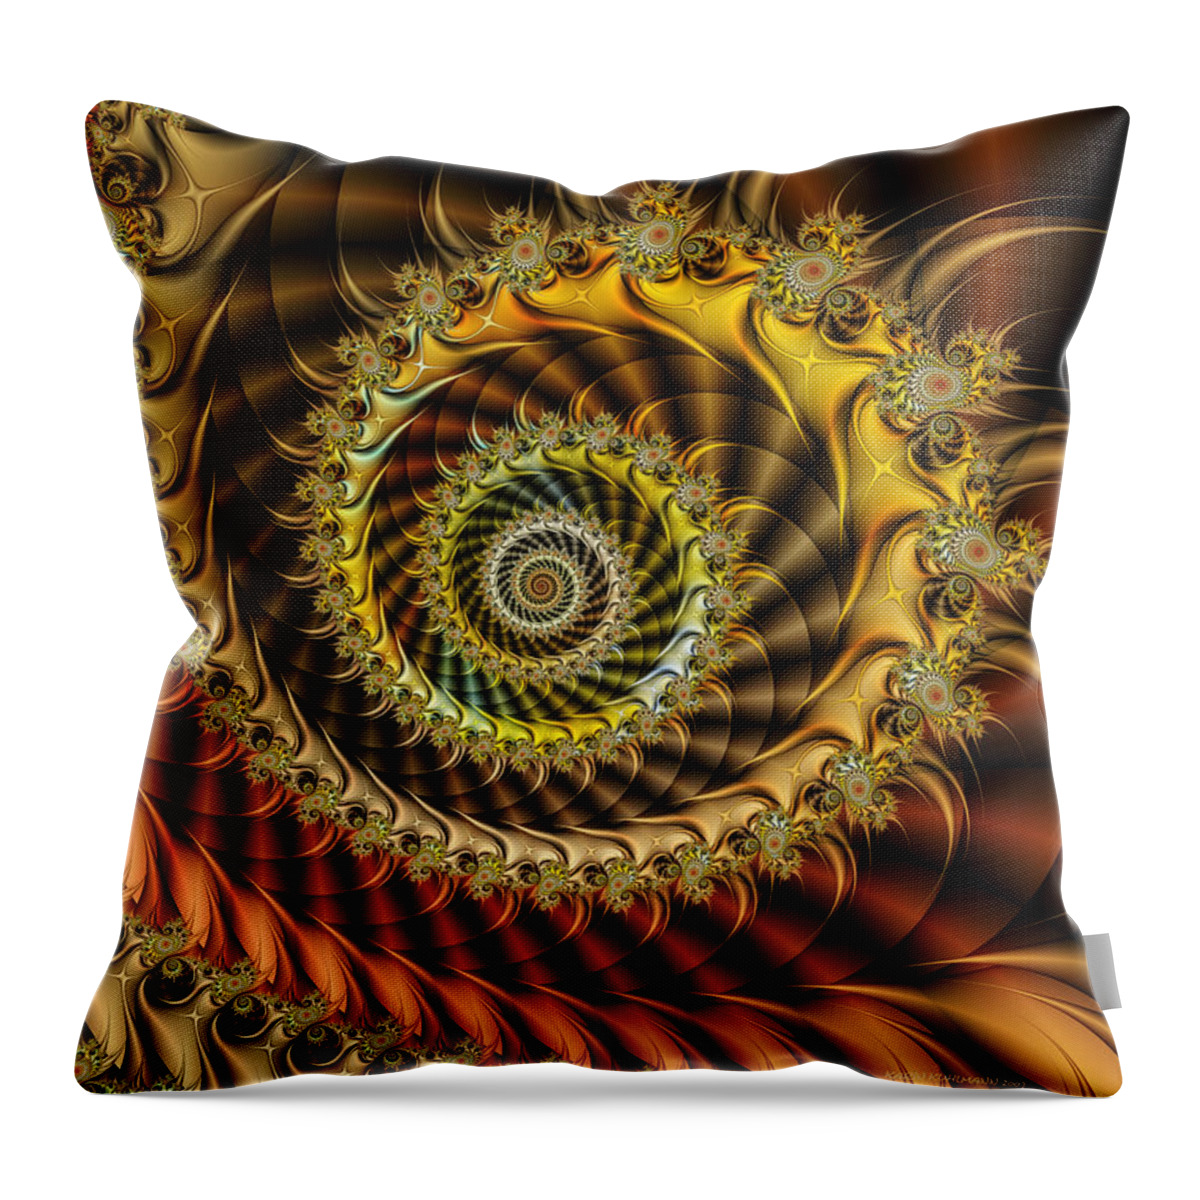 Fractal Throw Pillow featuring the digital art Polished Spiral by Karin Kuhlmann